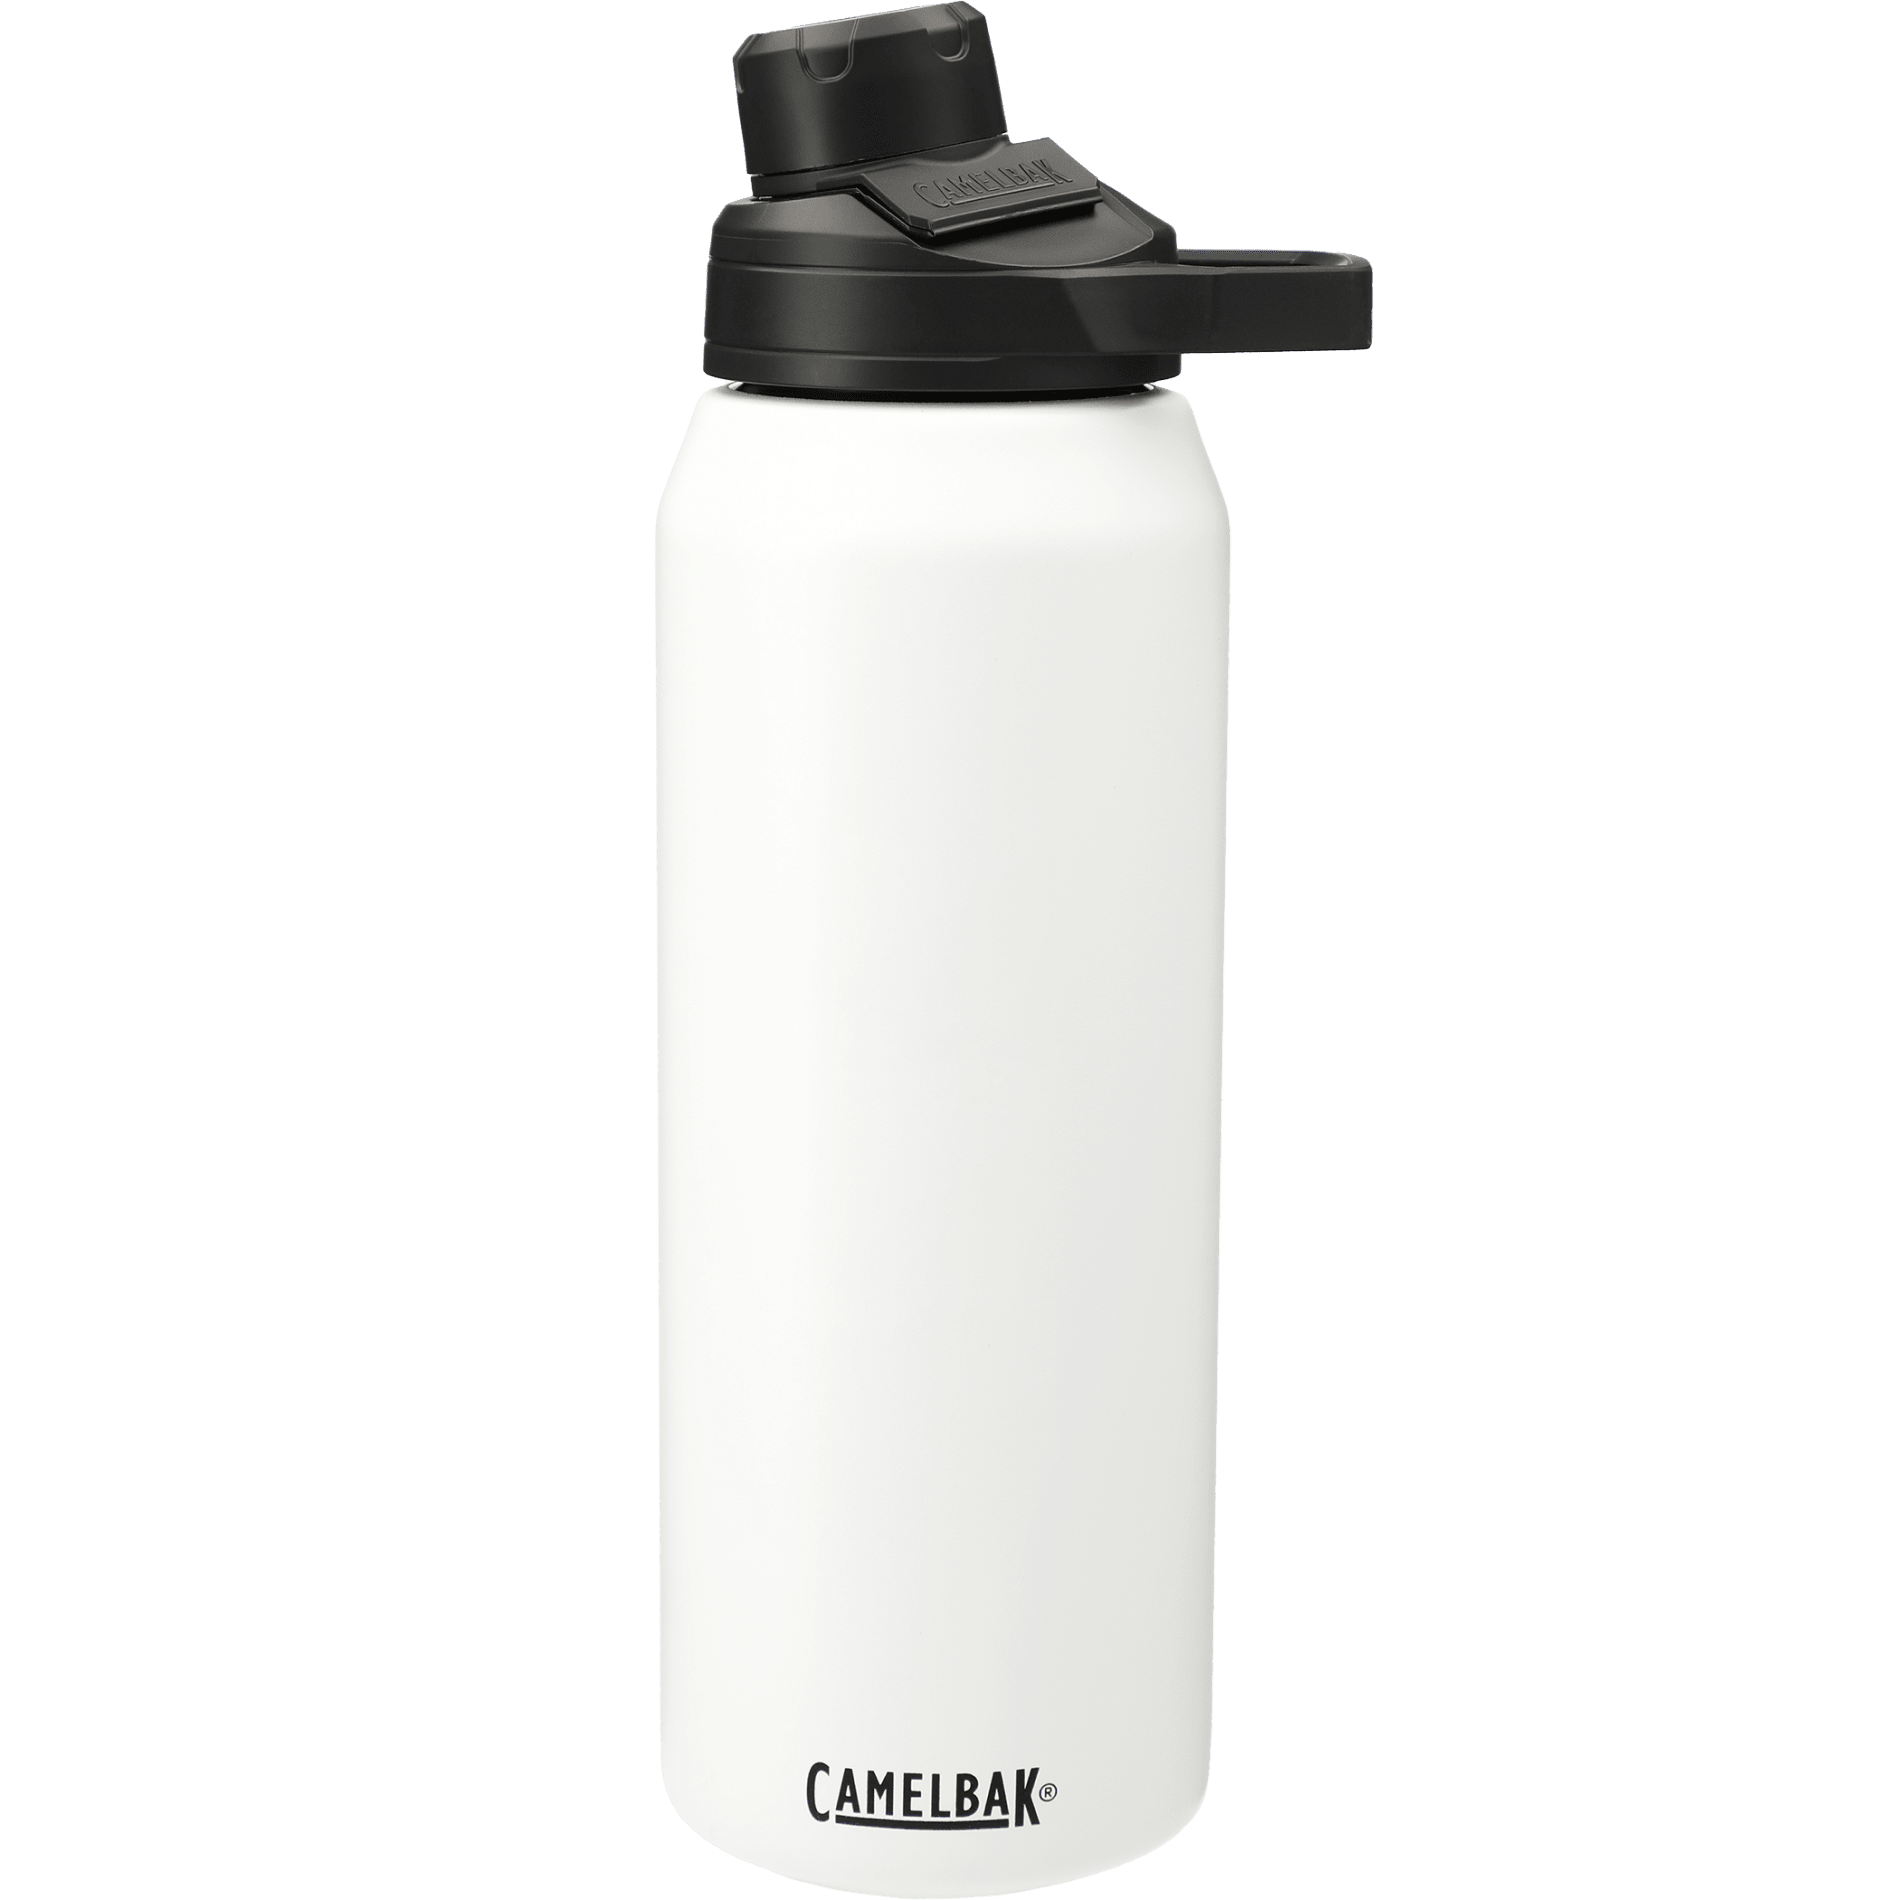 https://www.nyfifth.com/category/20220722/camelbak-1627-17-chute-mag-copper-vss-32oz_White-(WH).png